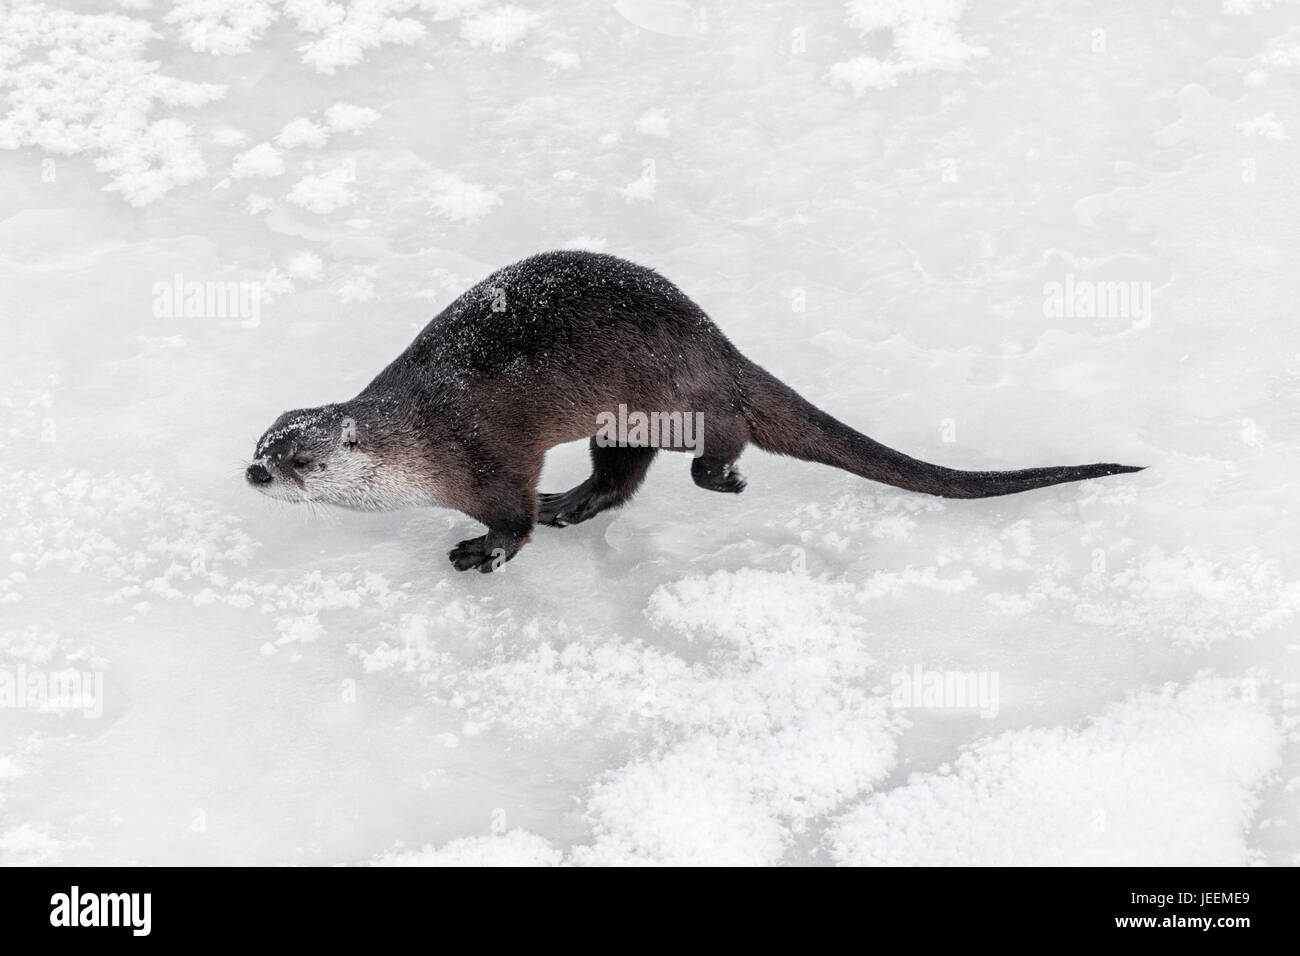 Northern River Otter Stock Photo